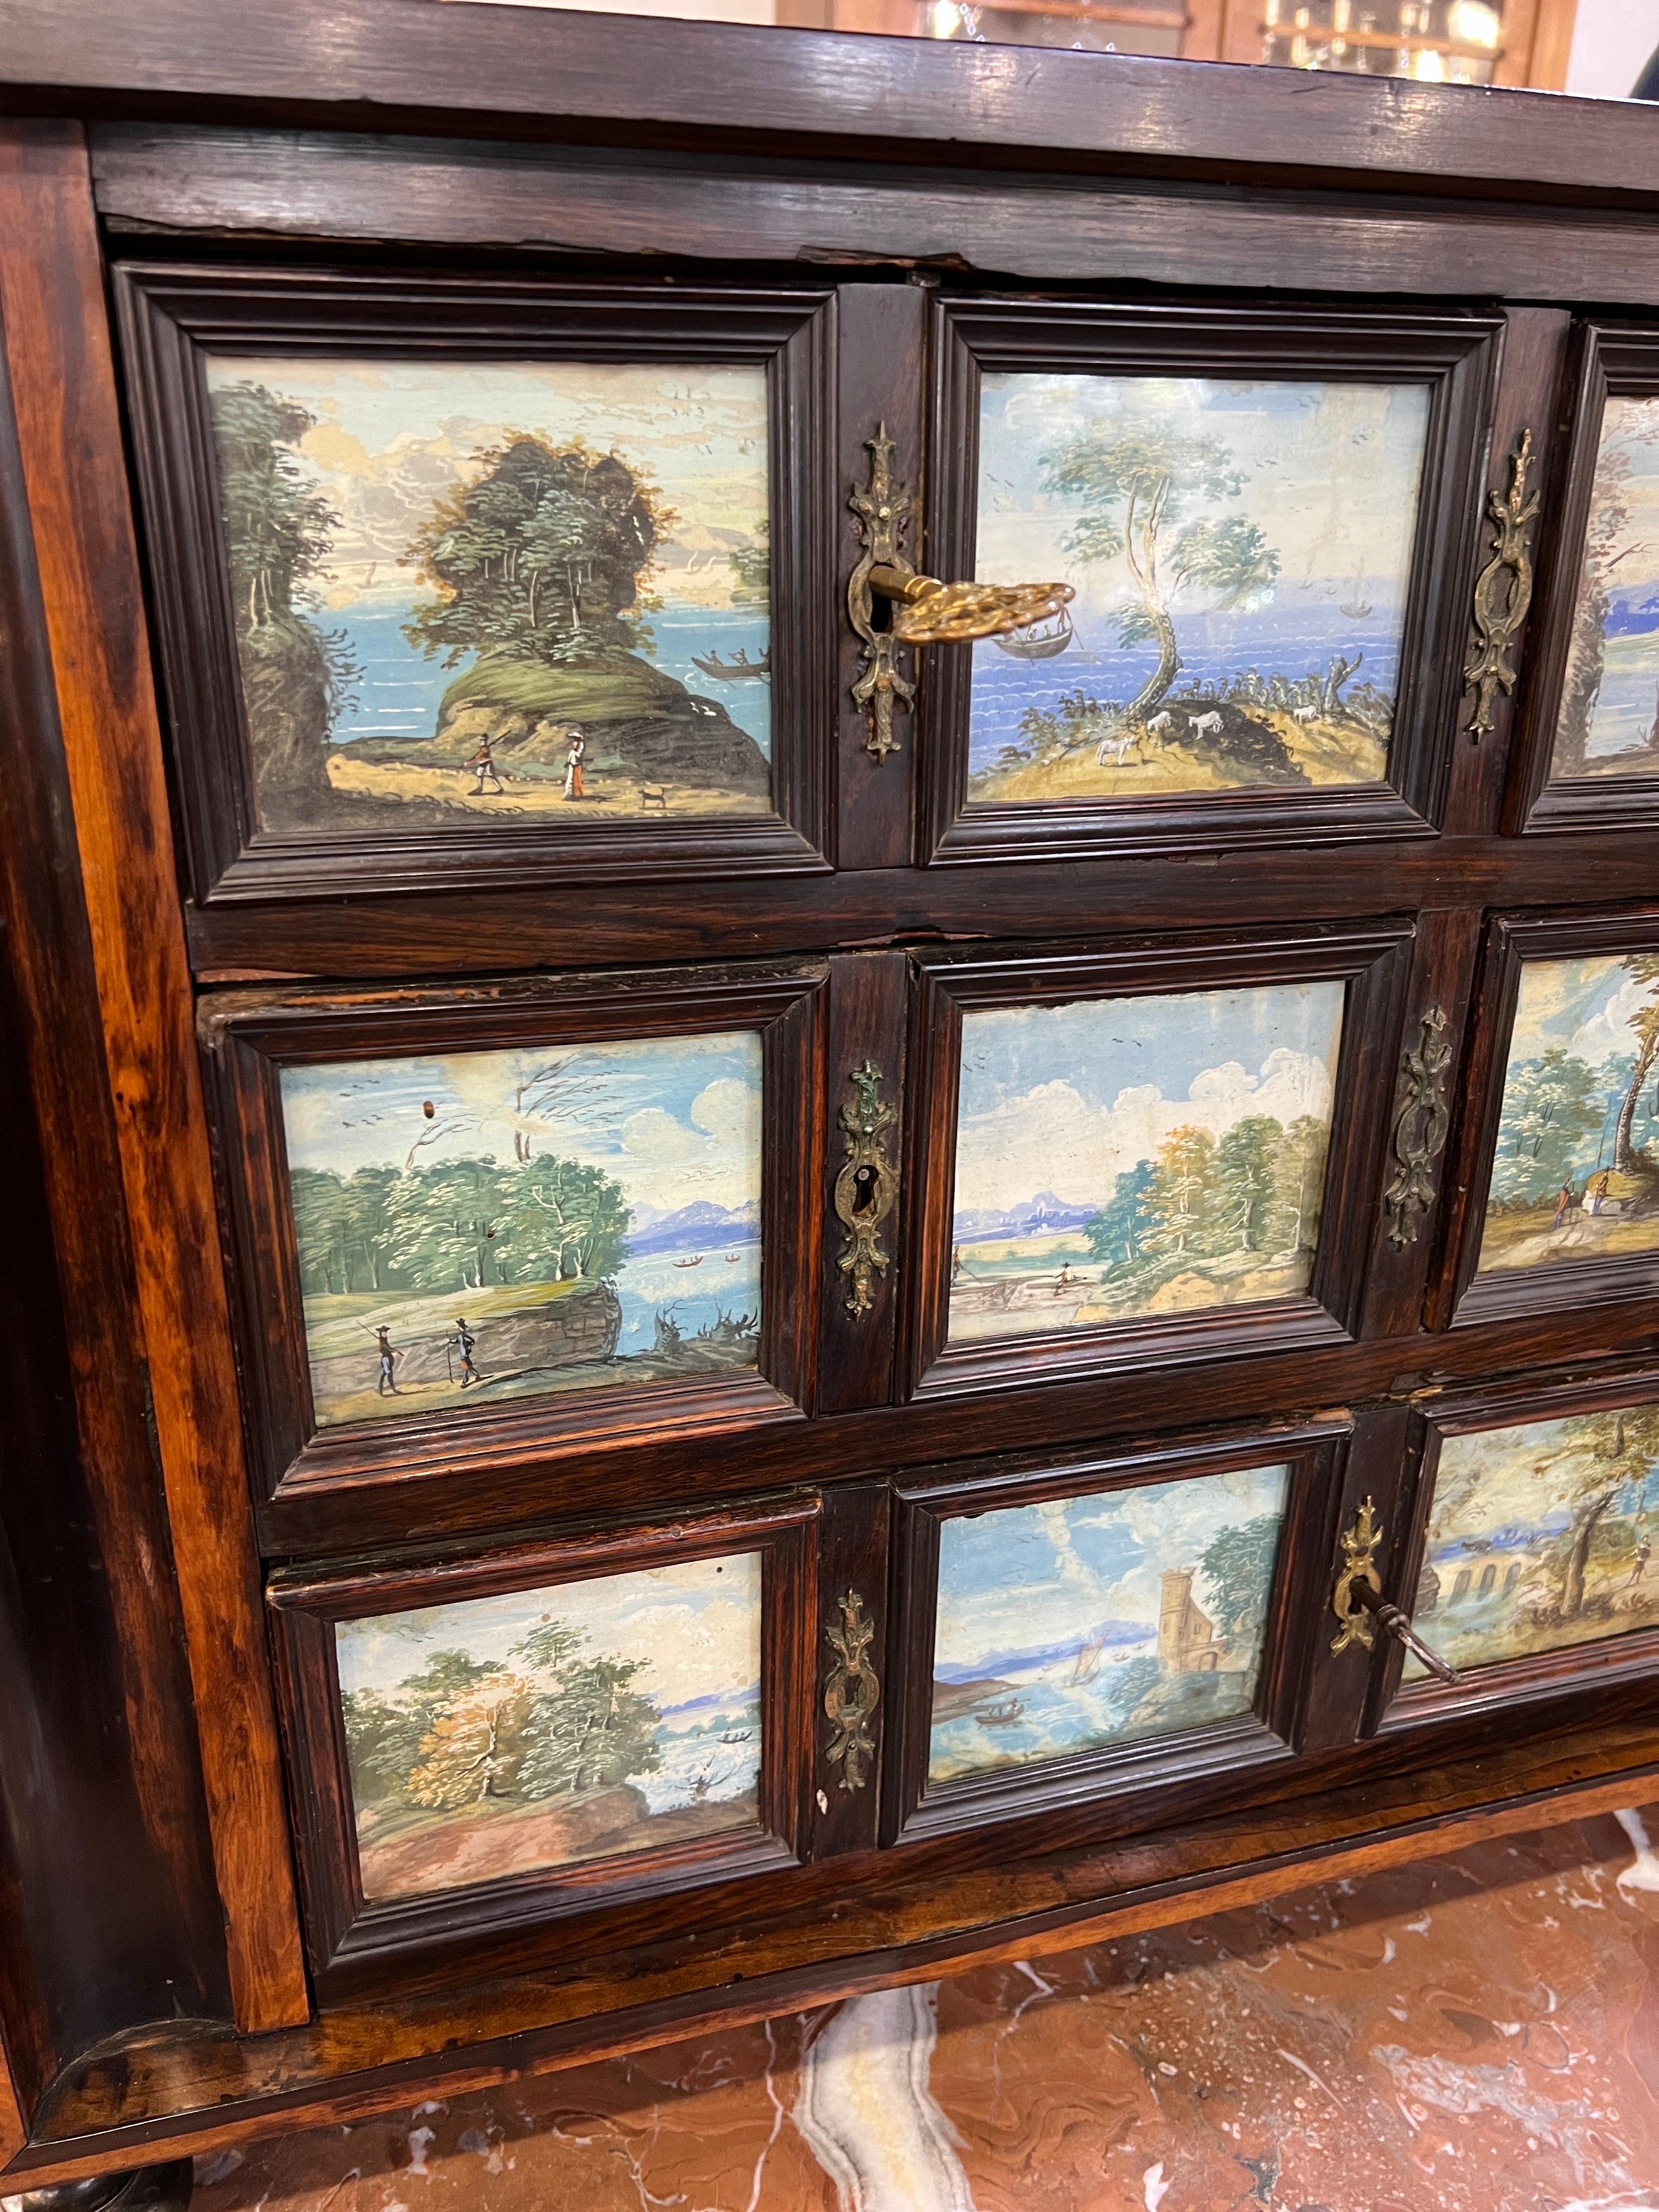 Antique 18th-century Italian ebonized walnut coin cabinet with paintings under glass , Naples mid-1700s , on each drawer there are paintings depicting the Bay of Naples, Vesuvius and the bucolic part around the city. Fine piece of furniture and in